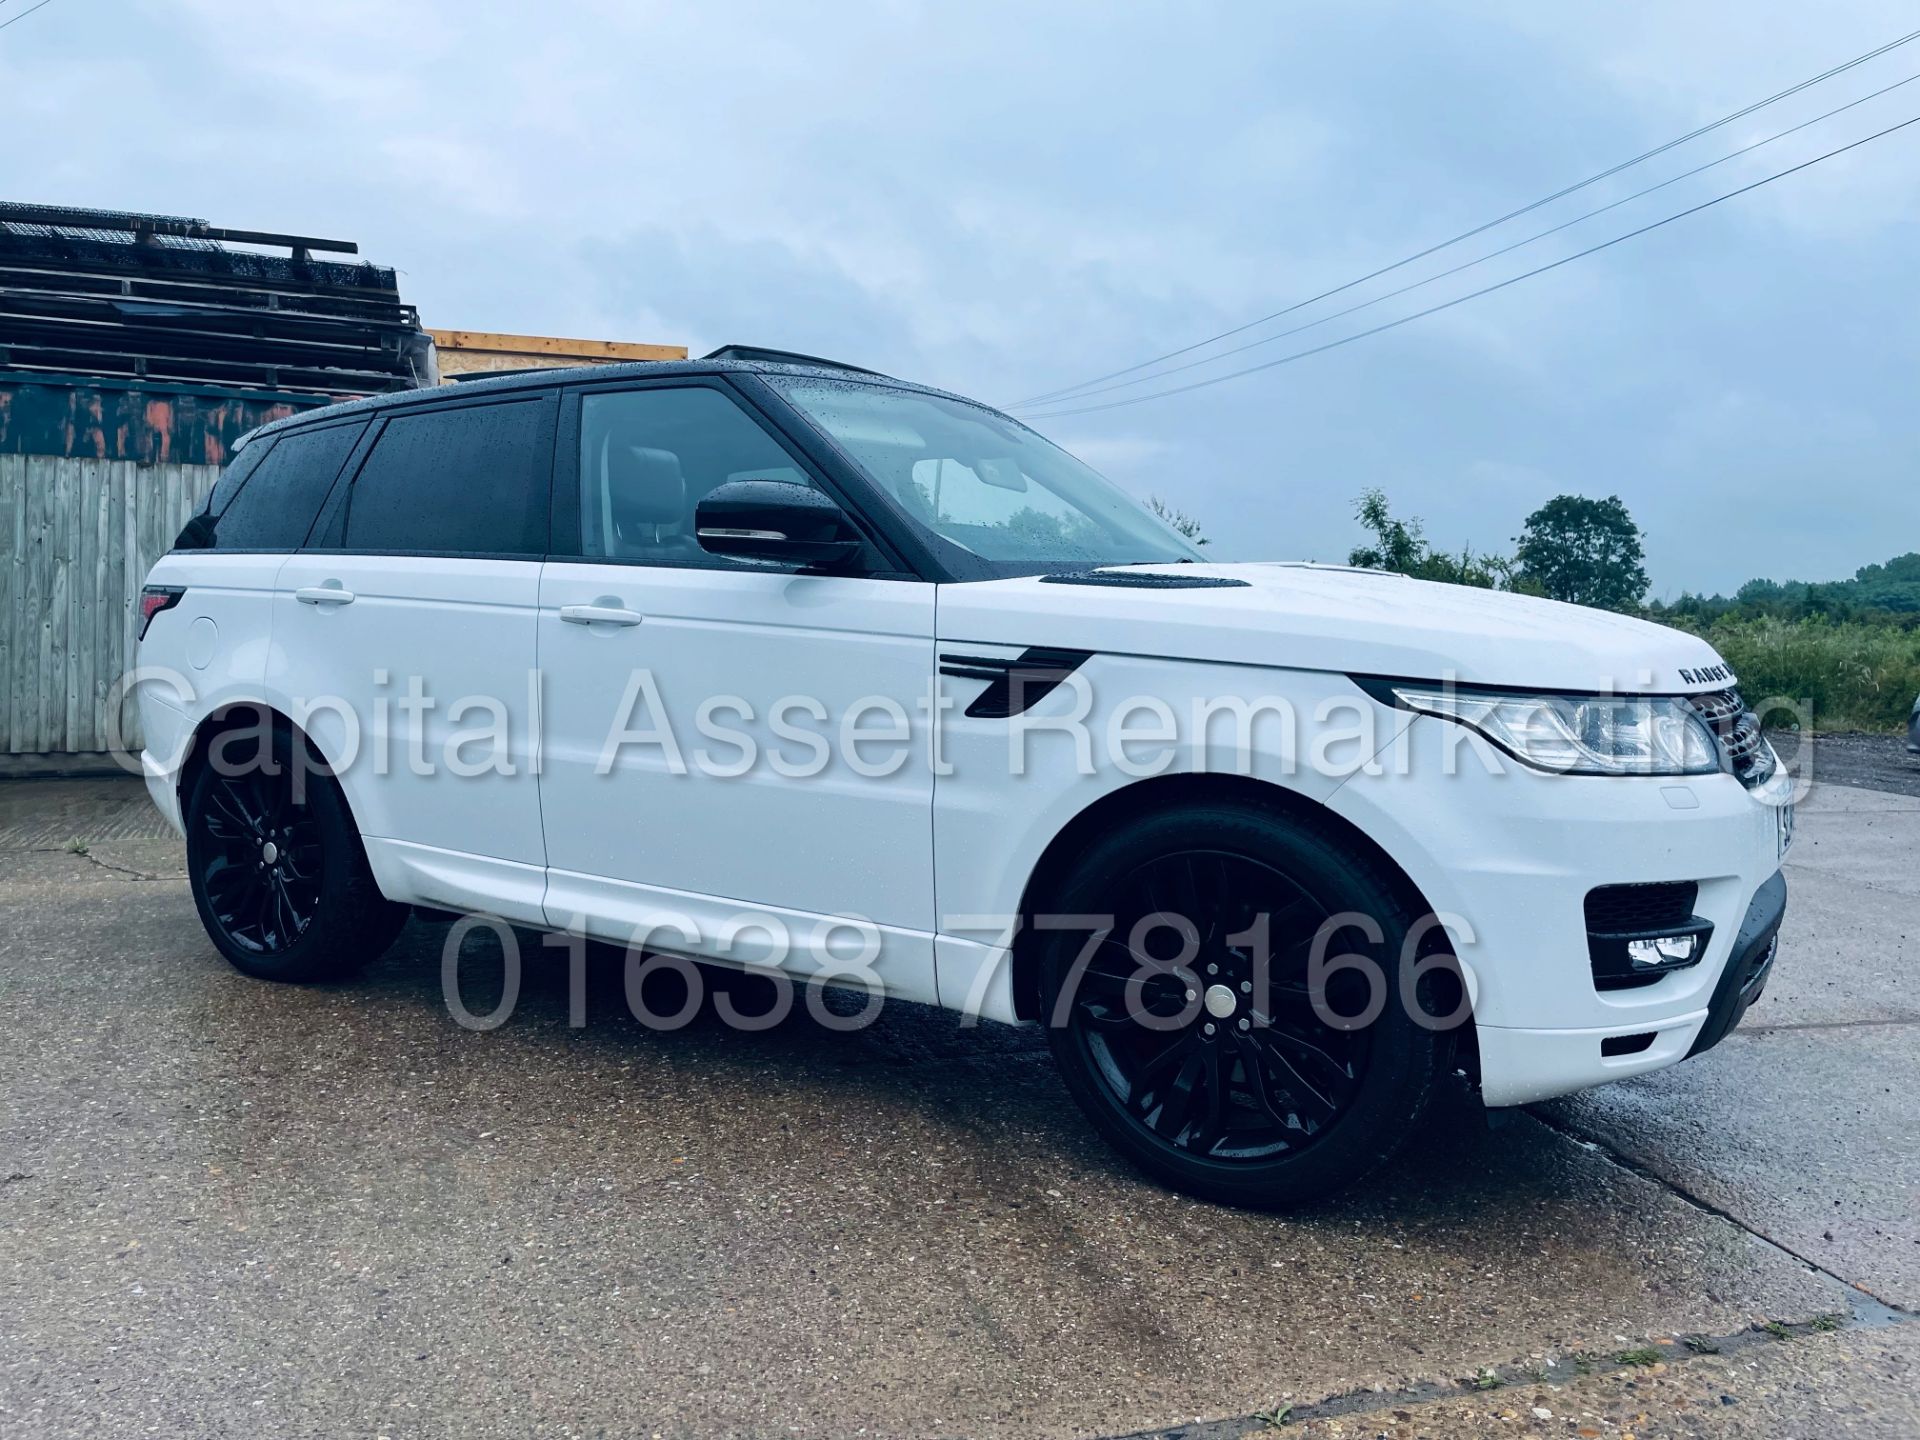 On Sale RANGE ROVER SPORT *SPECIAL EDITION* (2014) '3.0 TDV6 - AUTO' *SAT NAV & PAN ROOF* (TOP SPEC) - Image 11 of 54